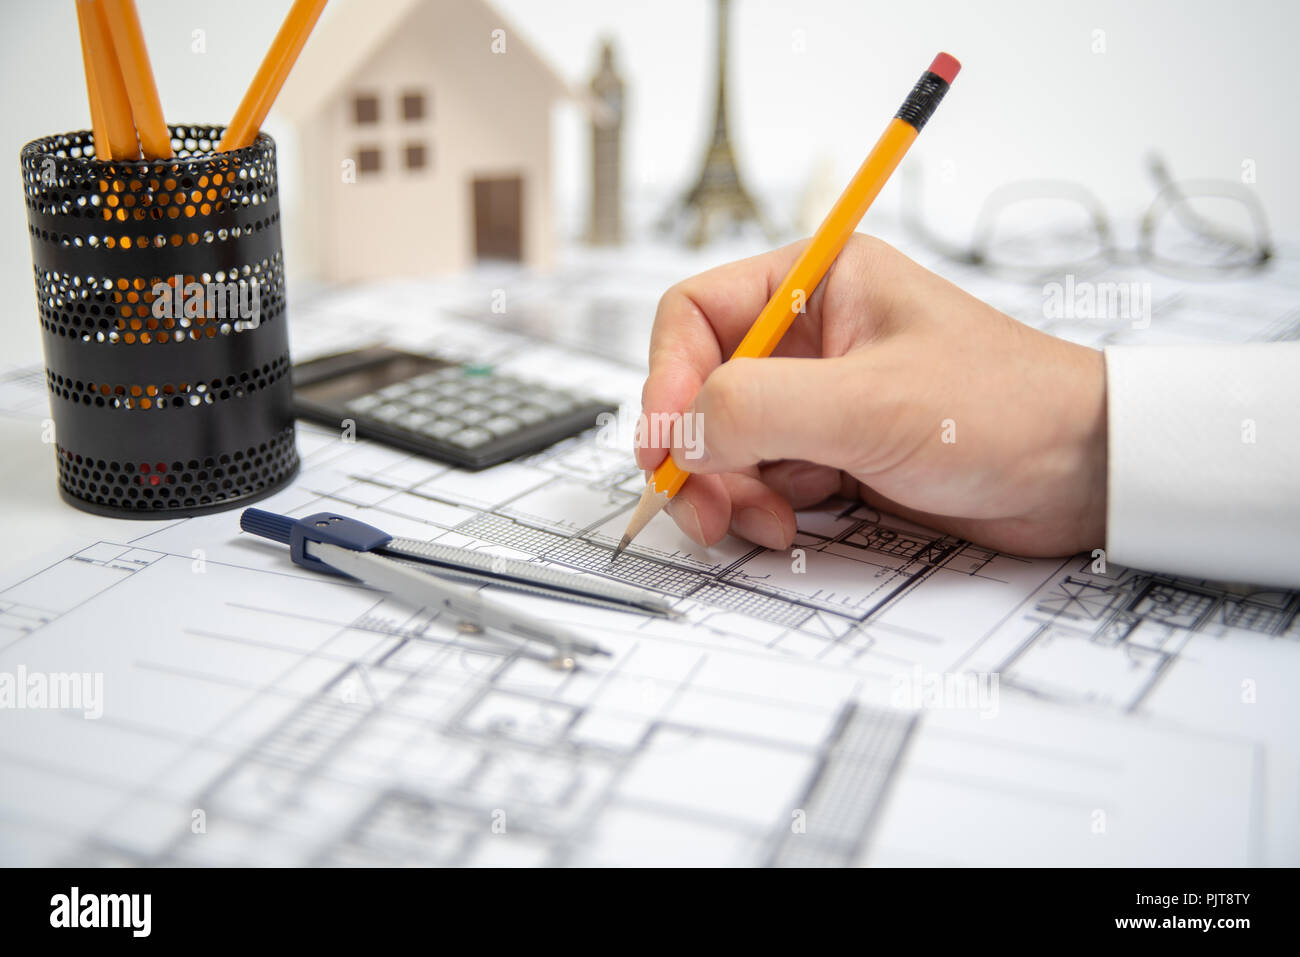 The hand of a male architect drawing a design using a pencil. Stock Photo